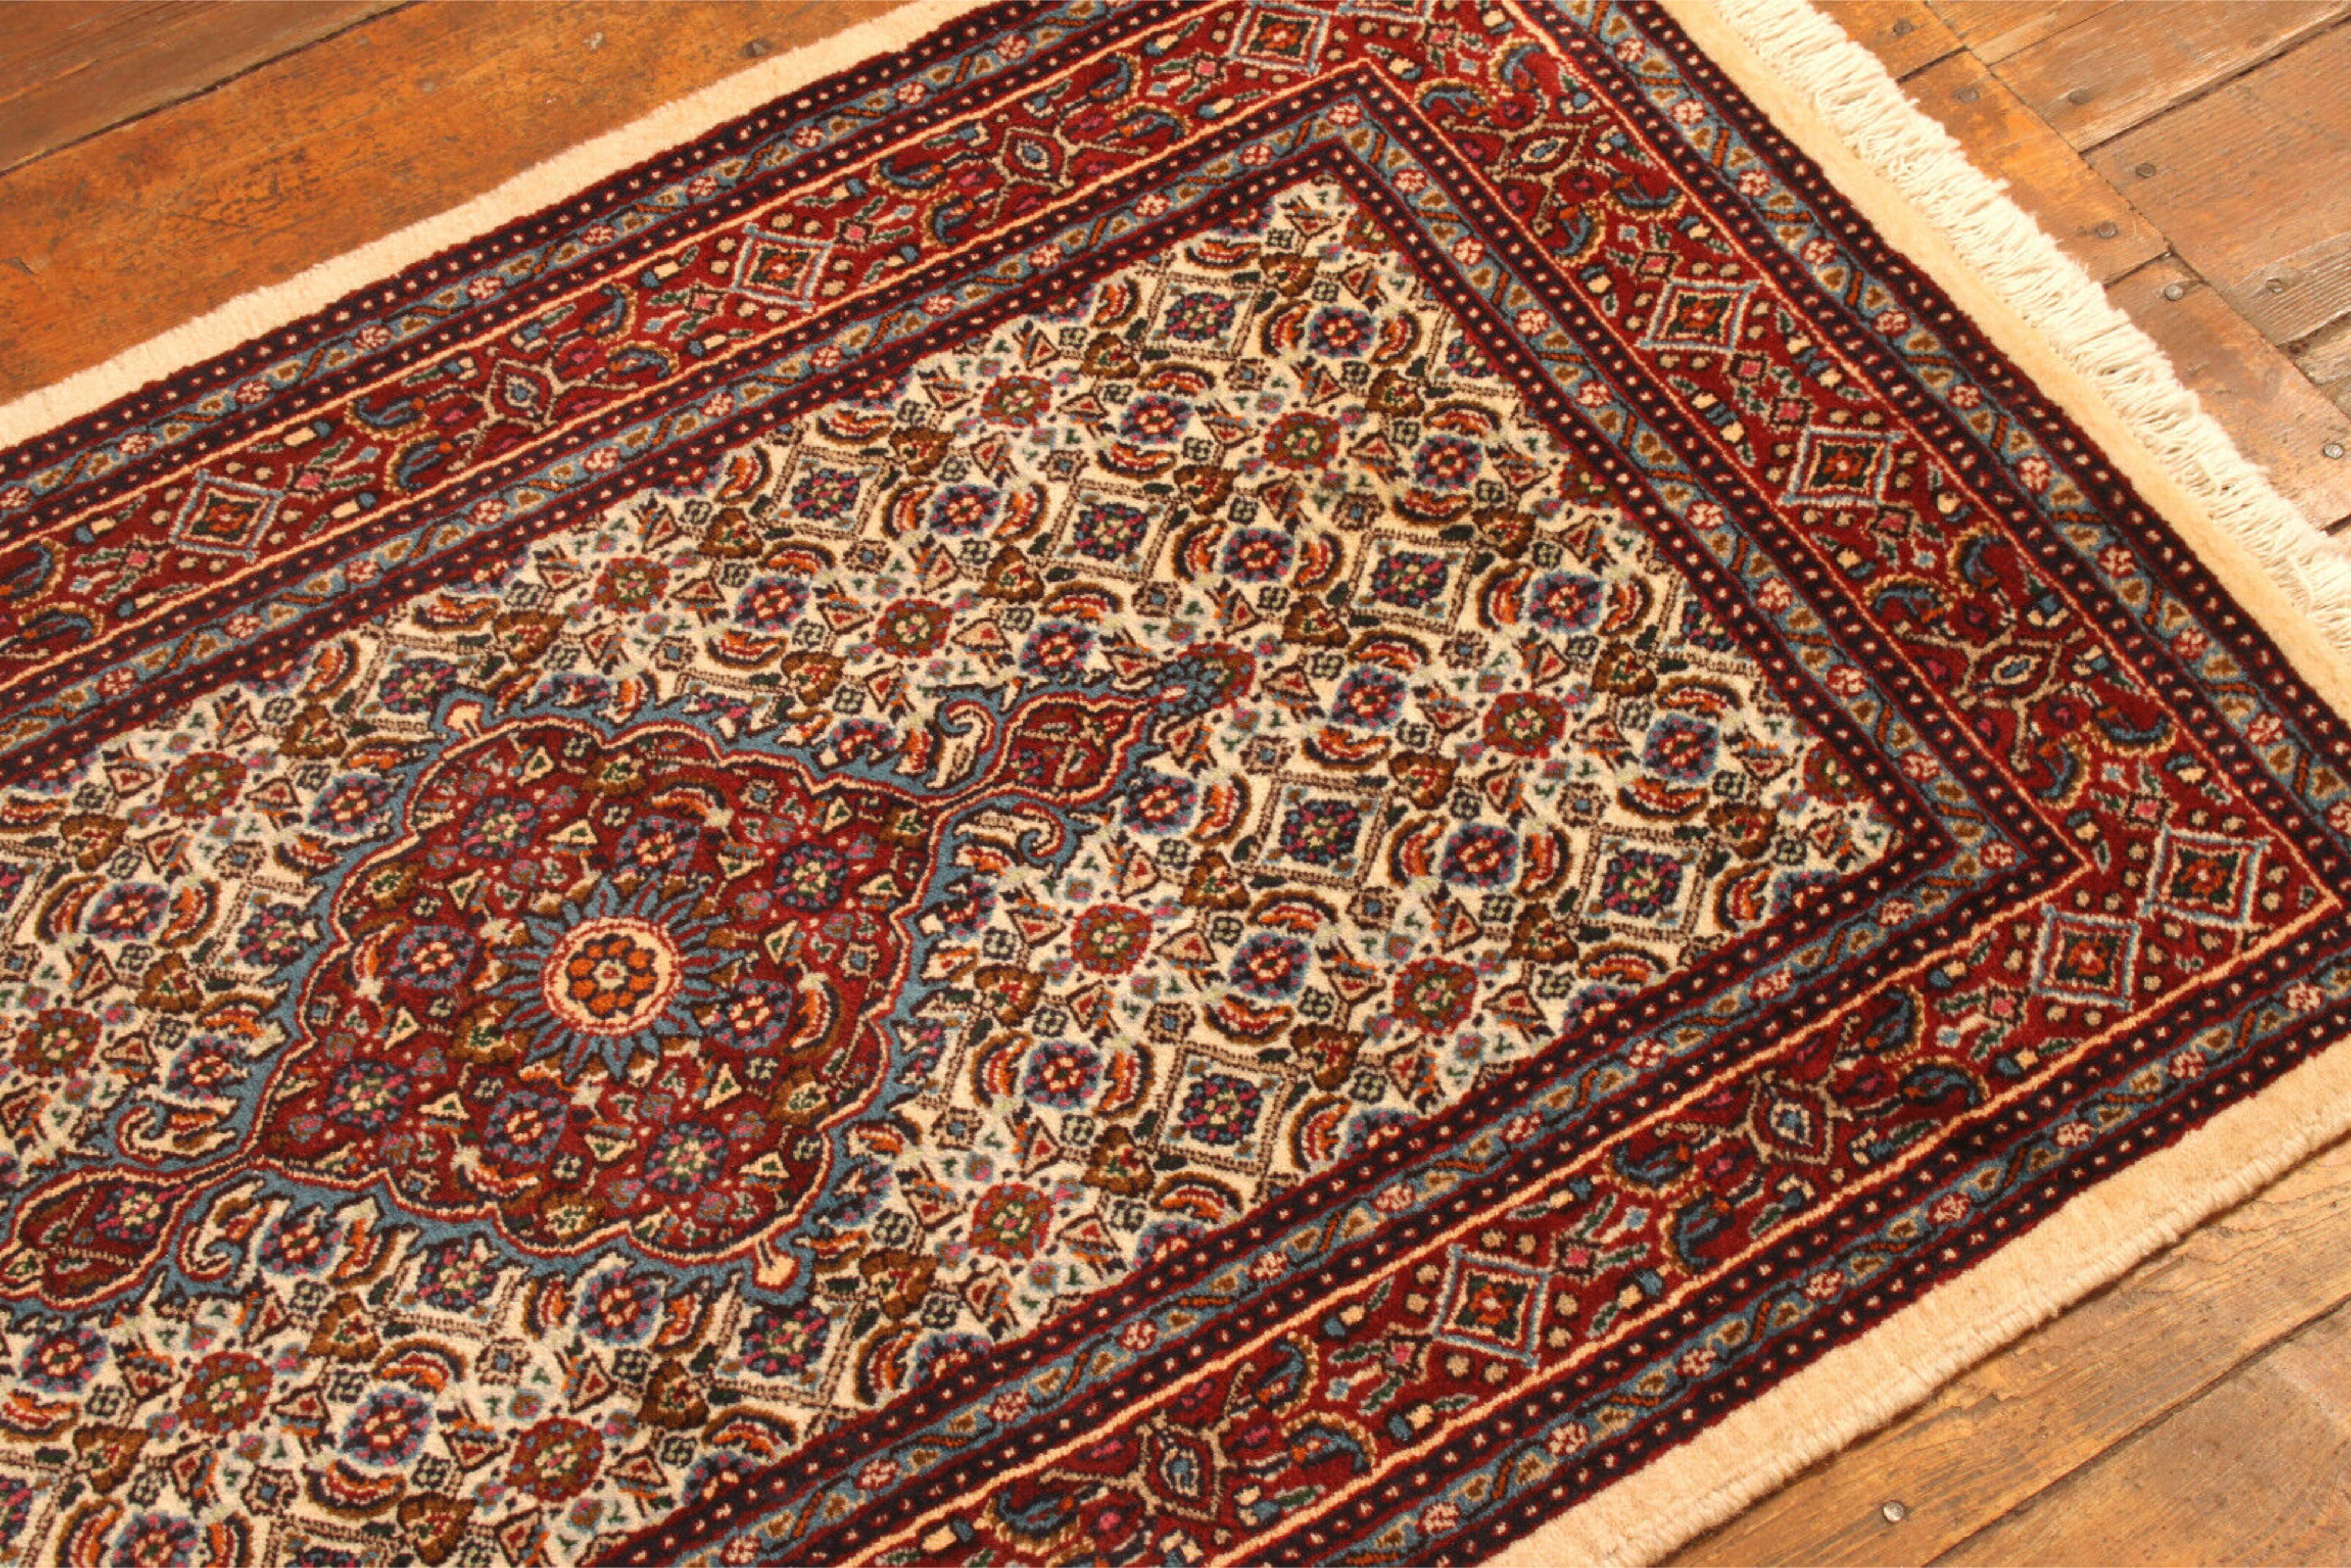 Handmade Vintage Persian Style Moud Runner Rug 2.6' x 9.6', 1980s - 1T51 For Sale 3